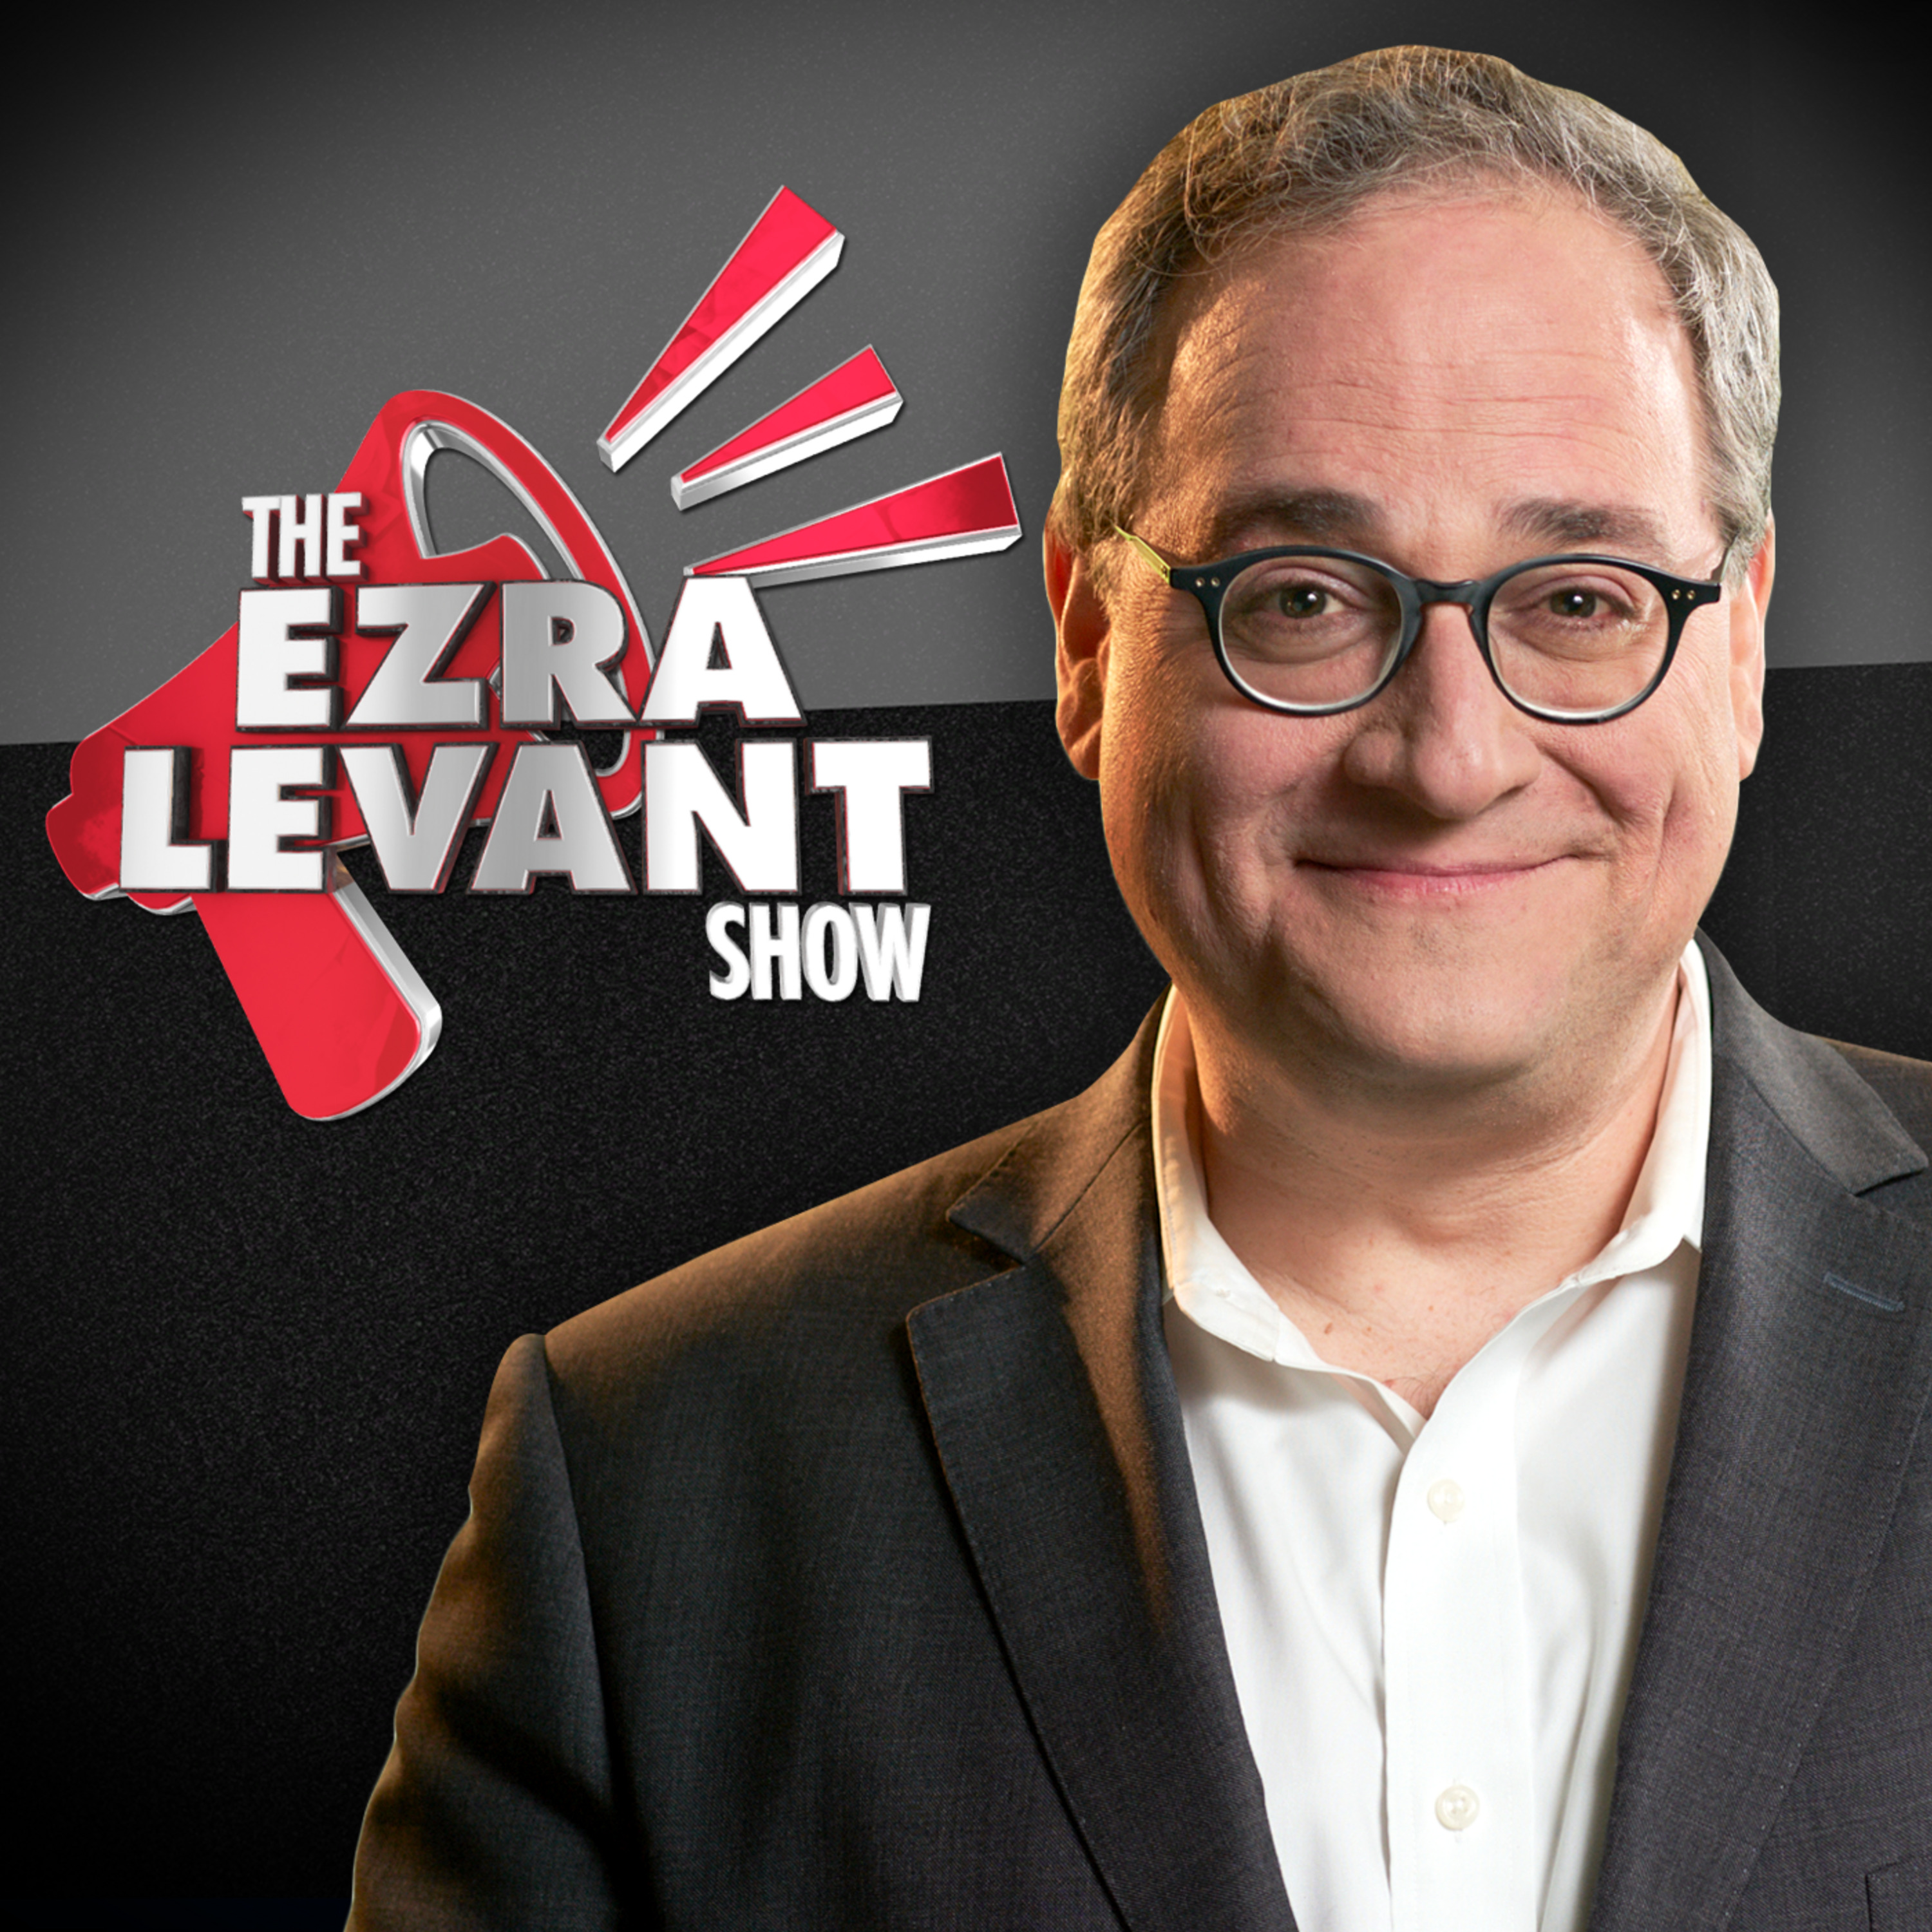 EZRA LEVANT | Will Mark Carney replace Justin Trudeau as the leader of the Liberals?